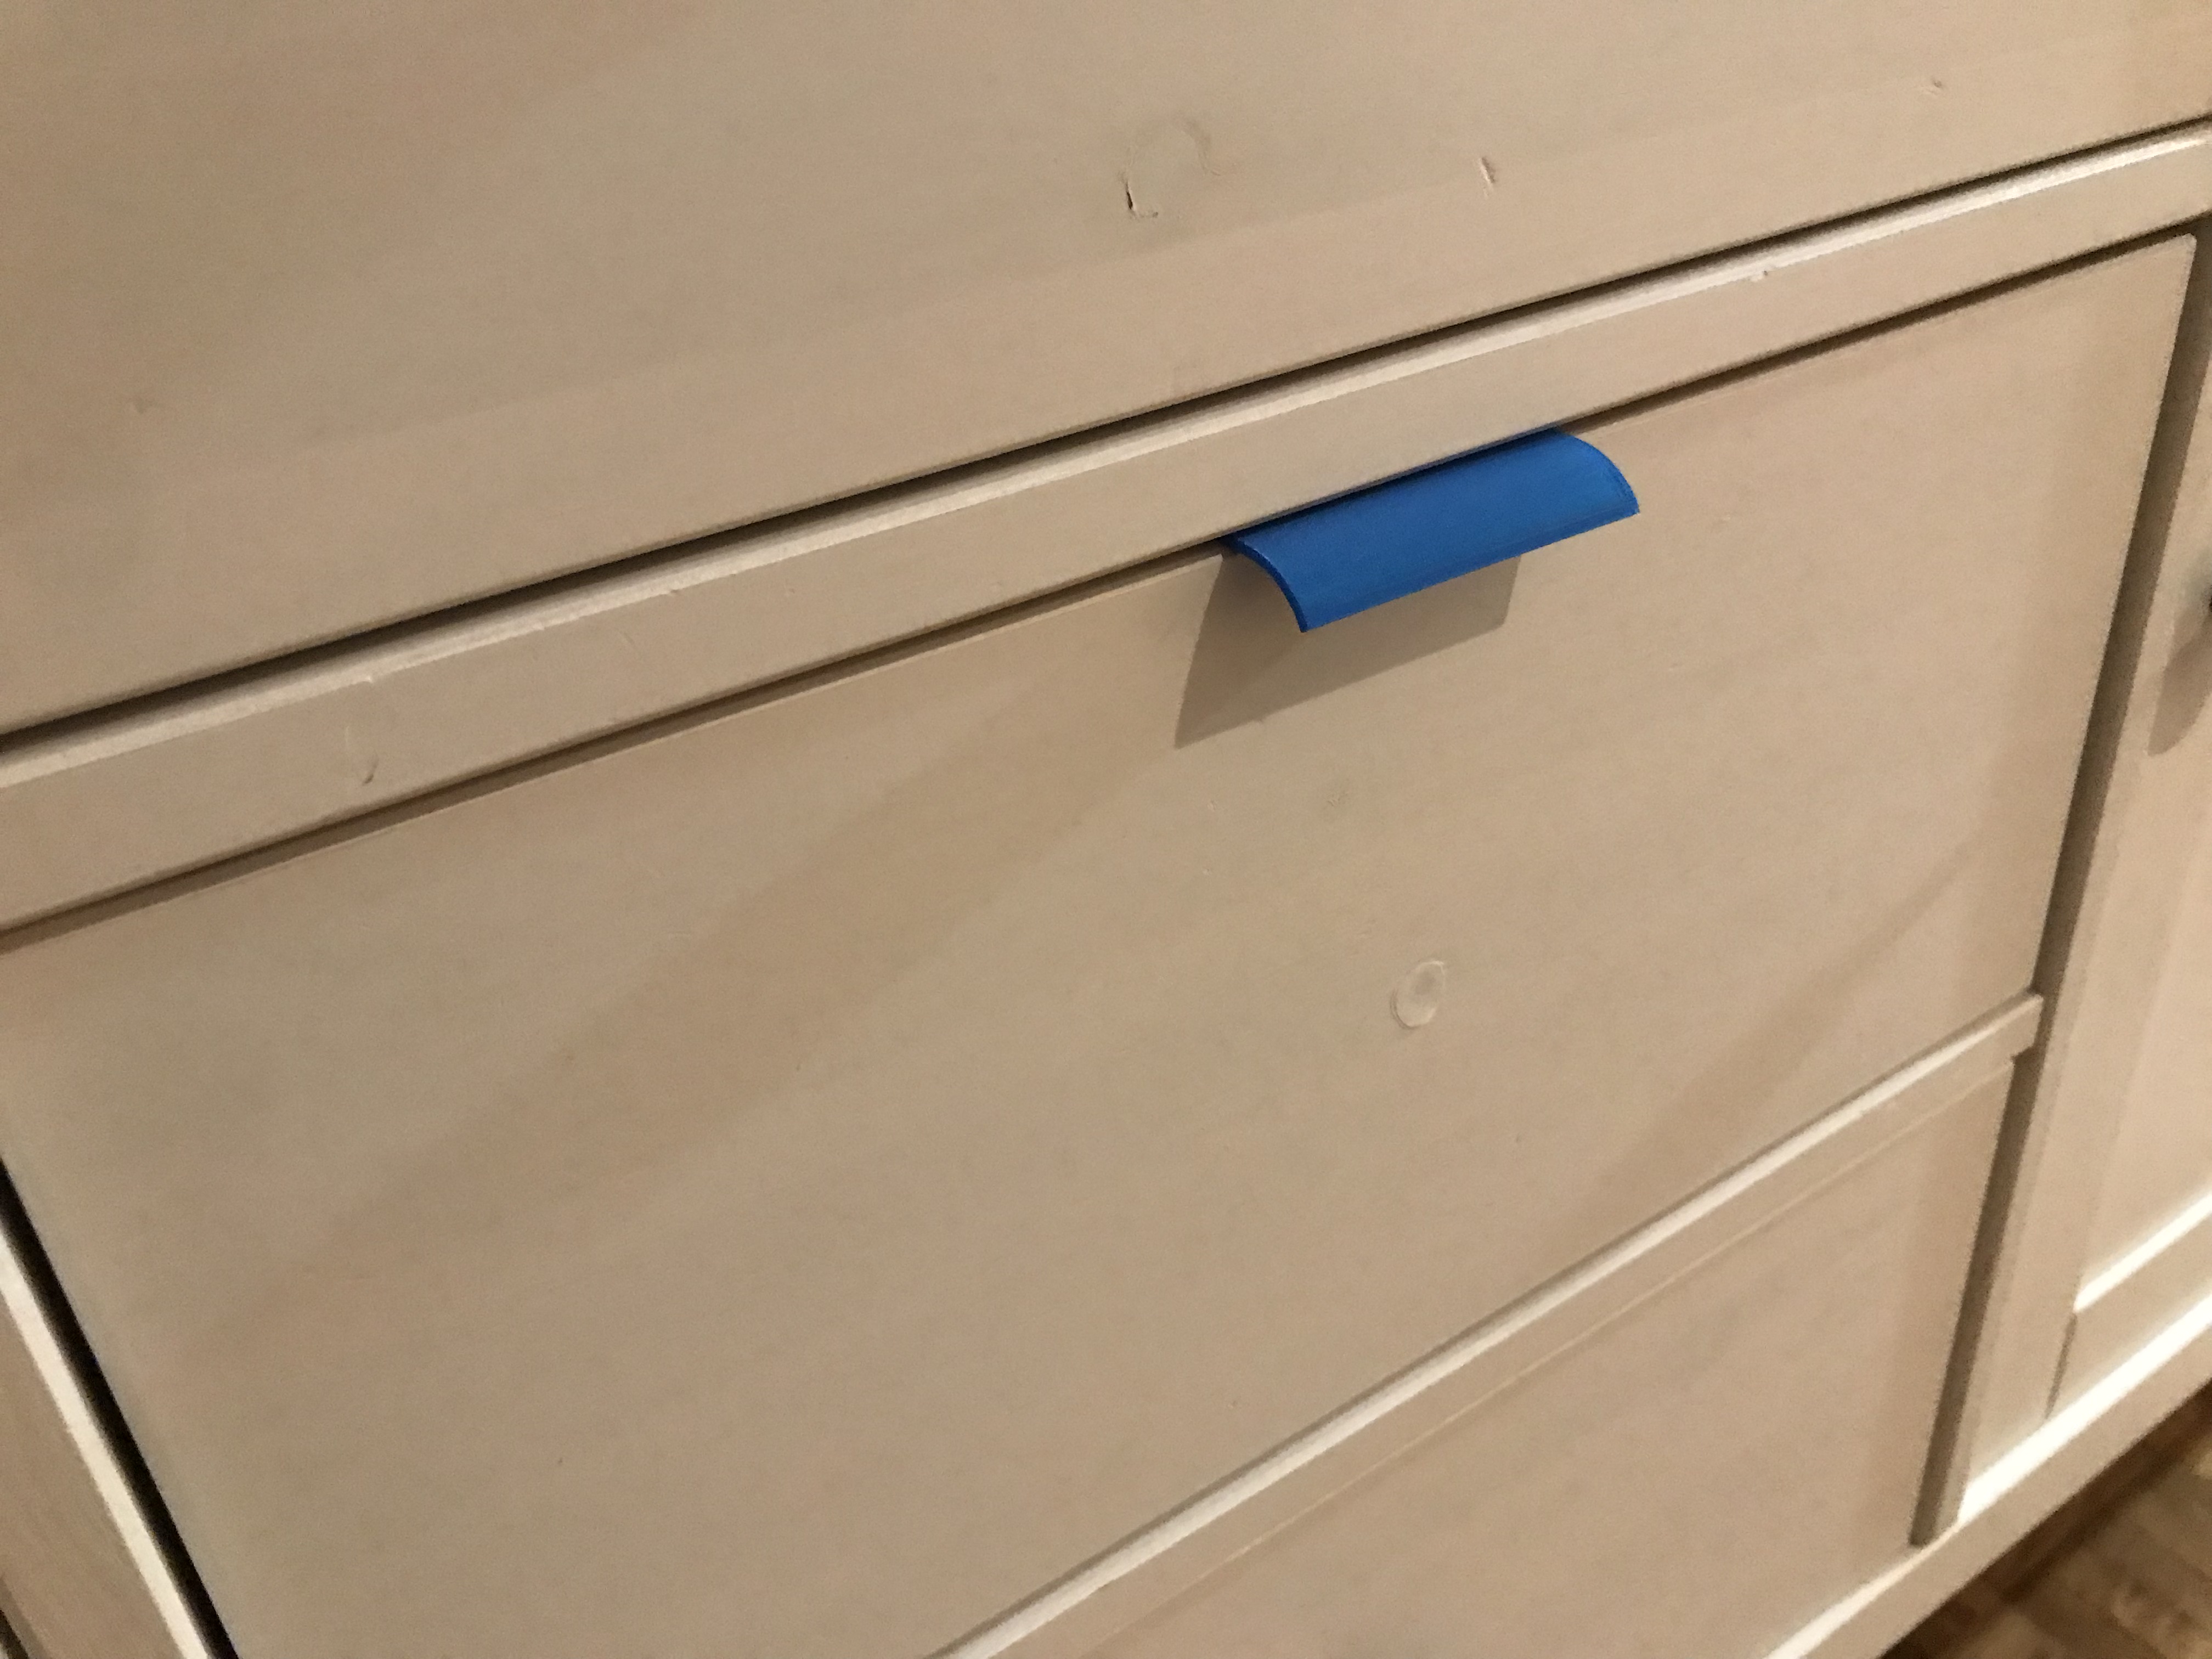 Relocated Drawer Knob or Handle